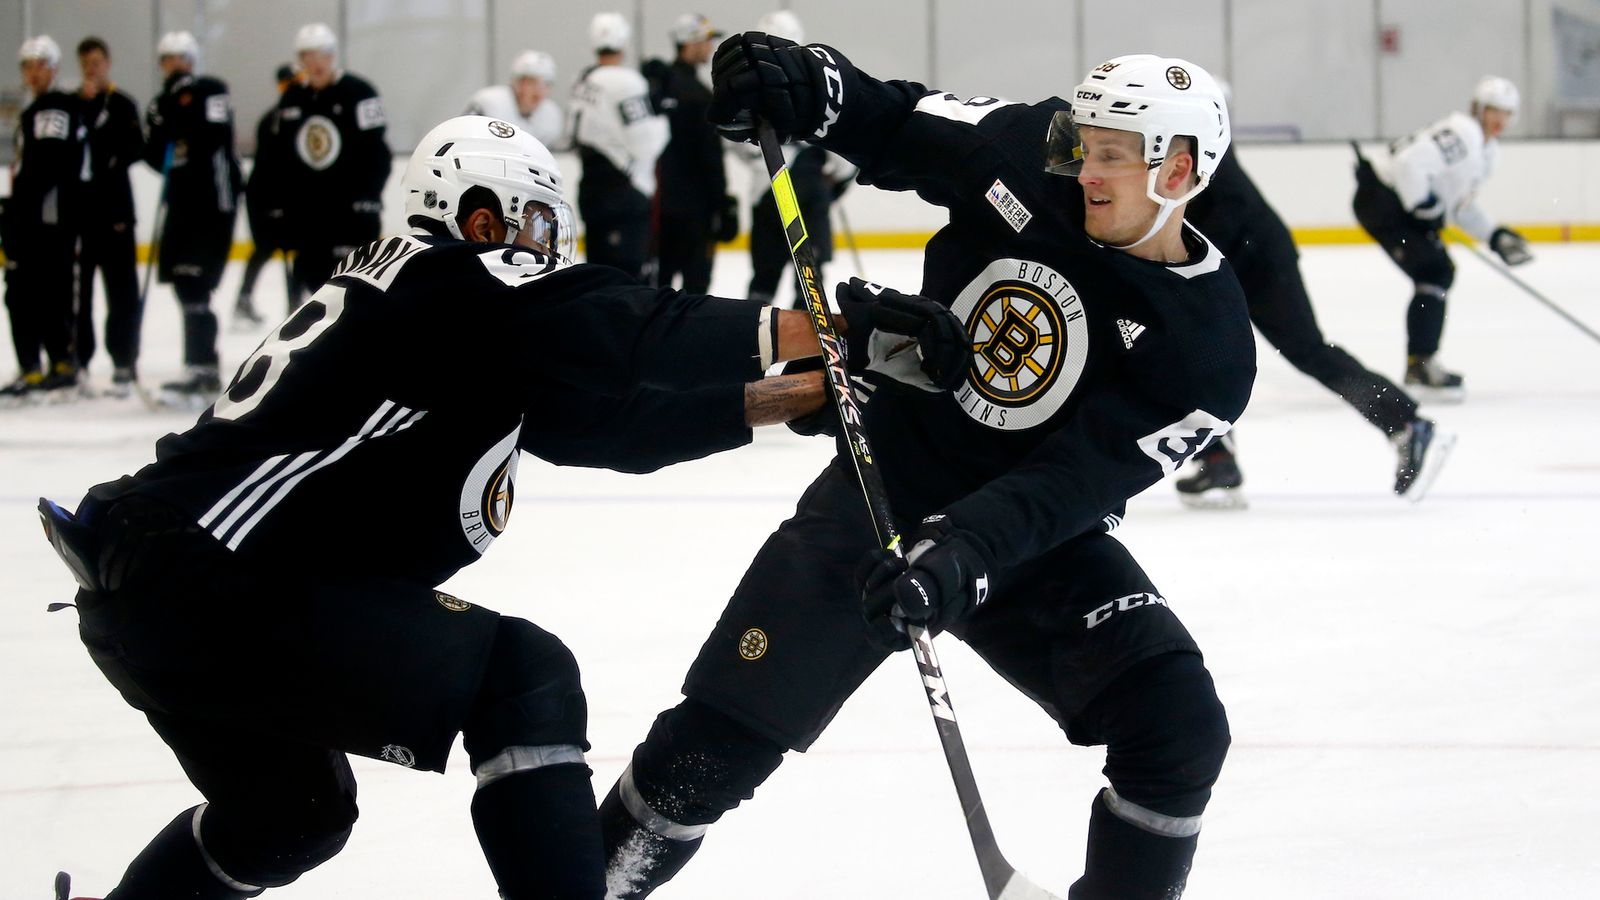 Donnelly: Coyle, McAvoy take matters into their own hands in